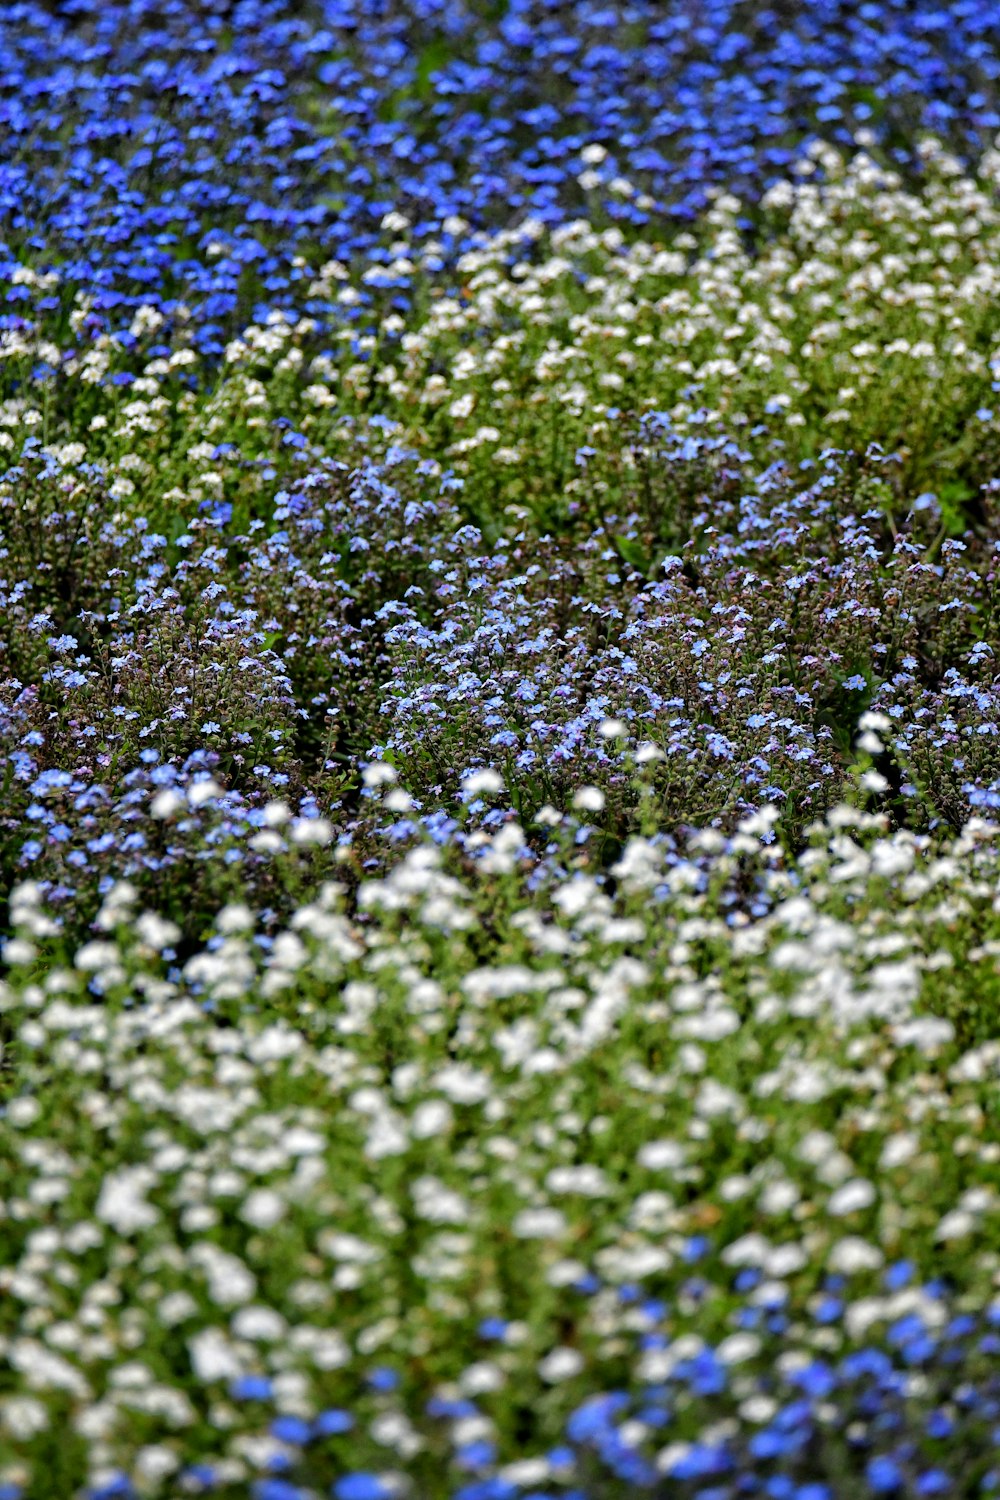 a field full of blue and white flowers